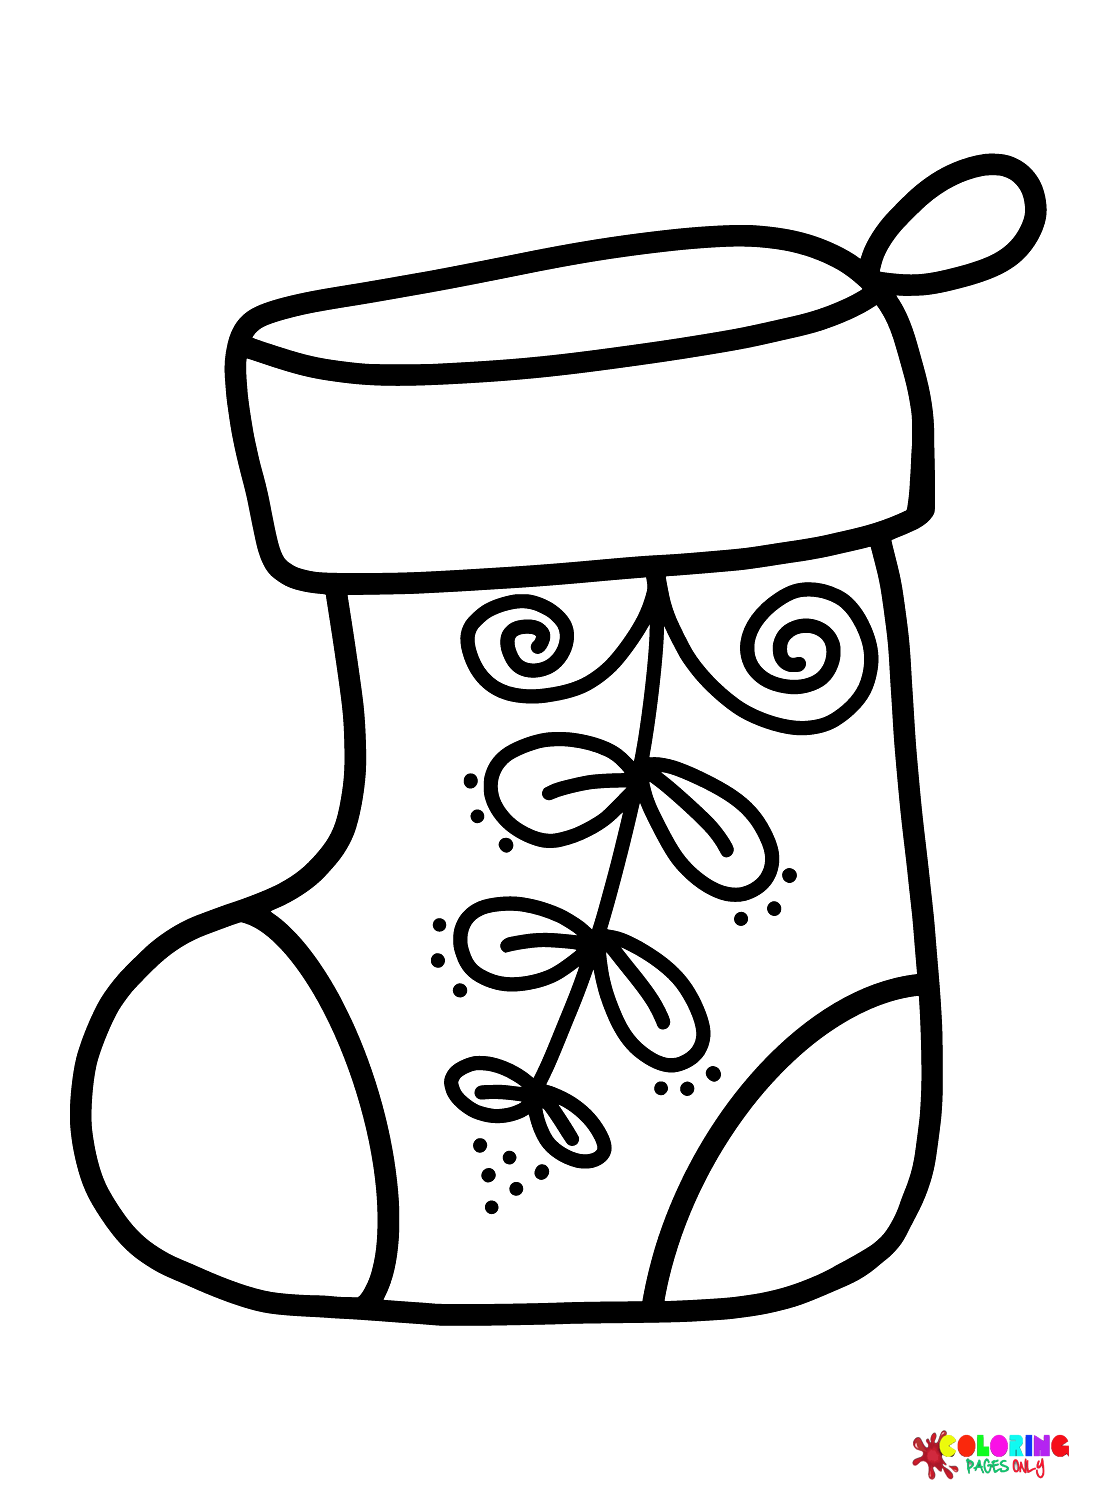 Lovely Socks Coloring Pages - Socks Coloring Pages - Coloring Pages For ...